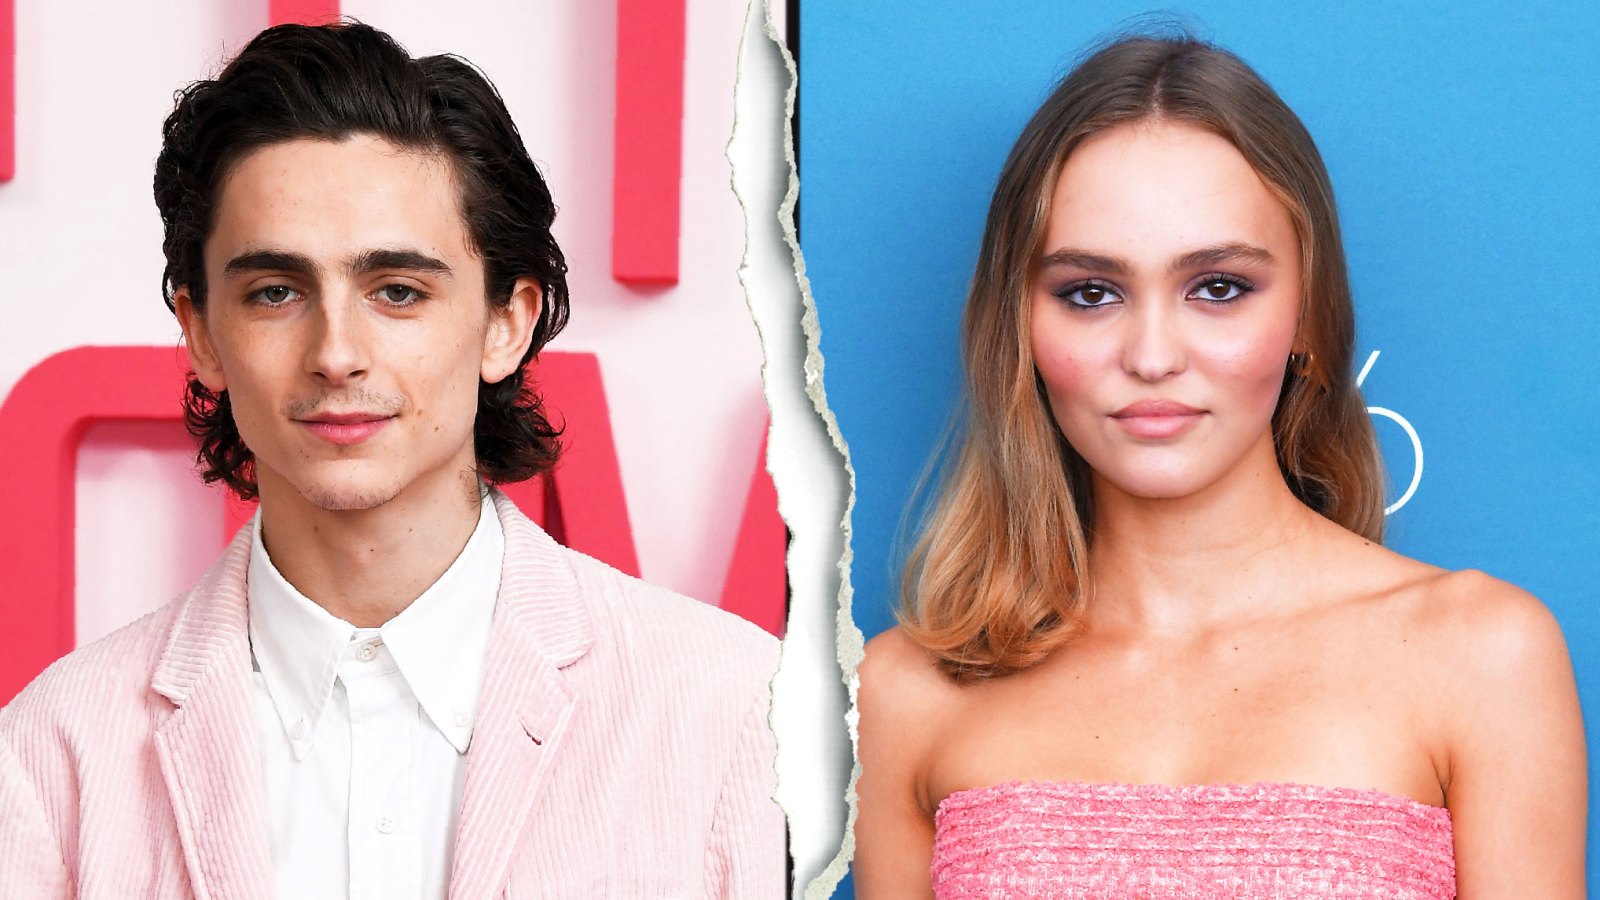 Timothee Chalamet and Lily-Rose Depp Split After More Than 1 Year of Dating